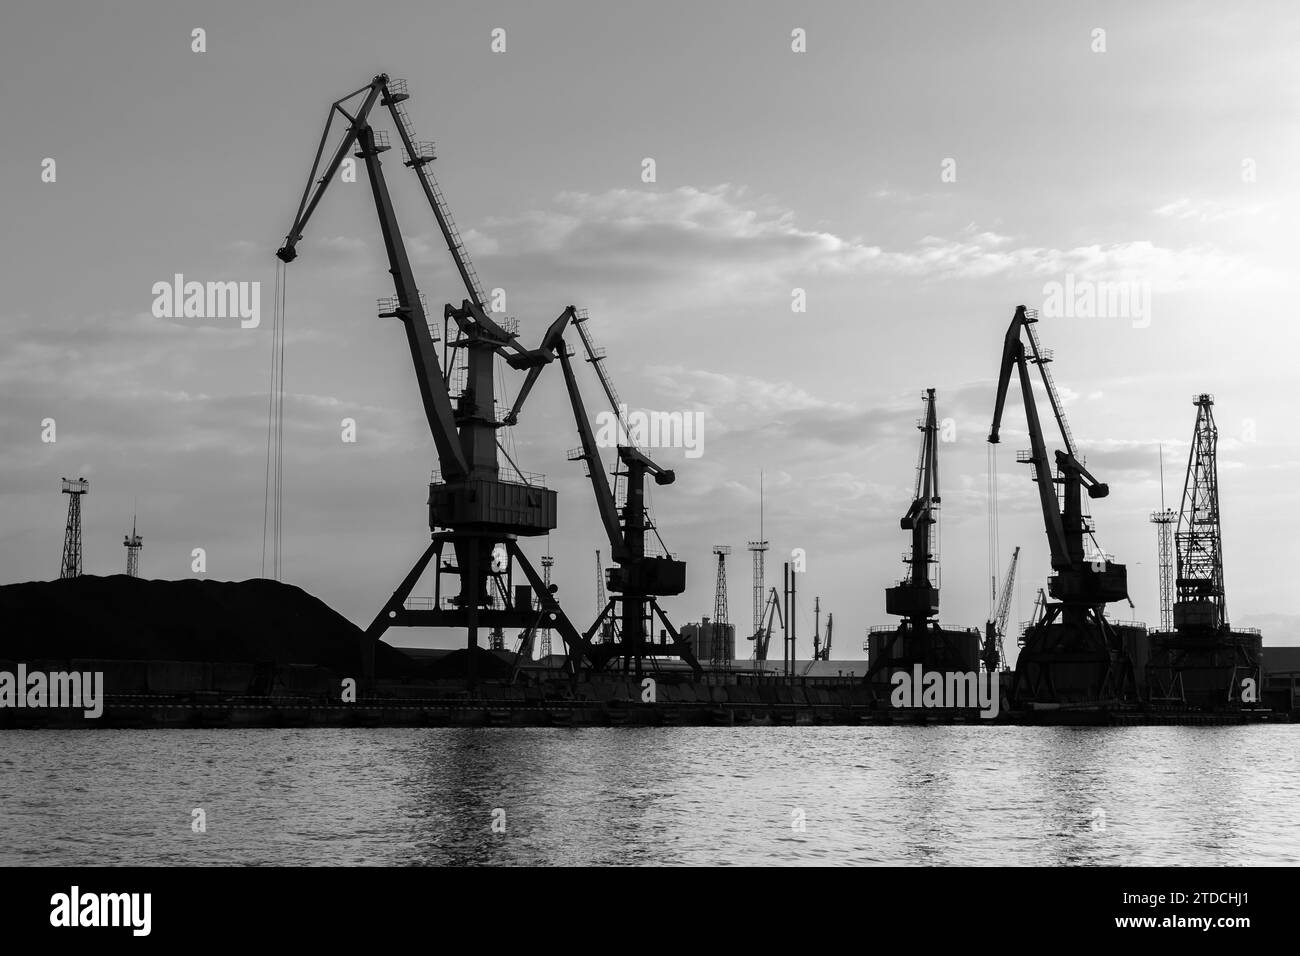 Harbour cranes at the sea port of Kaliningrad, Russia. Silhouette photo Stock Photo